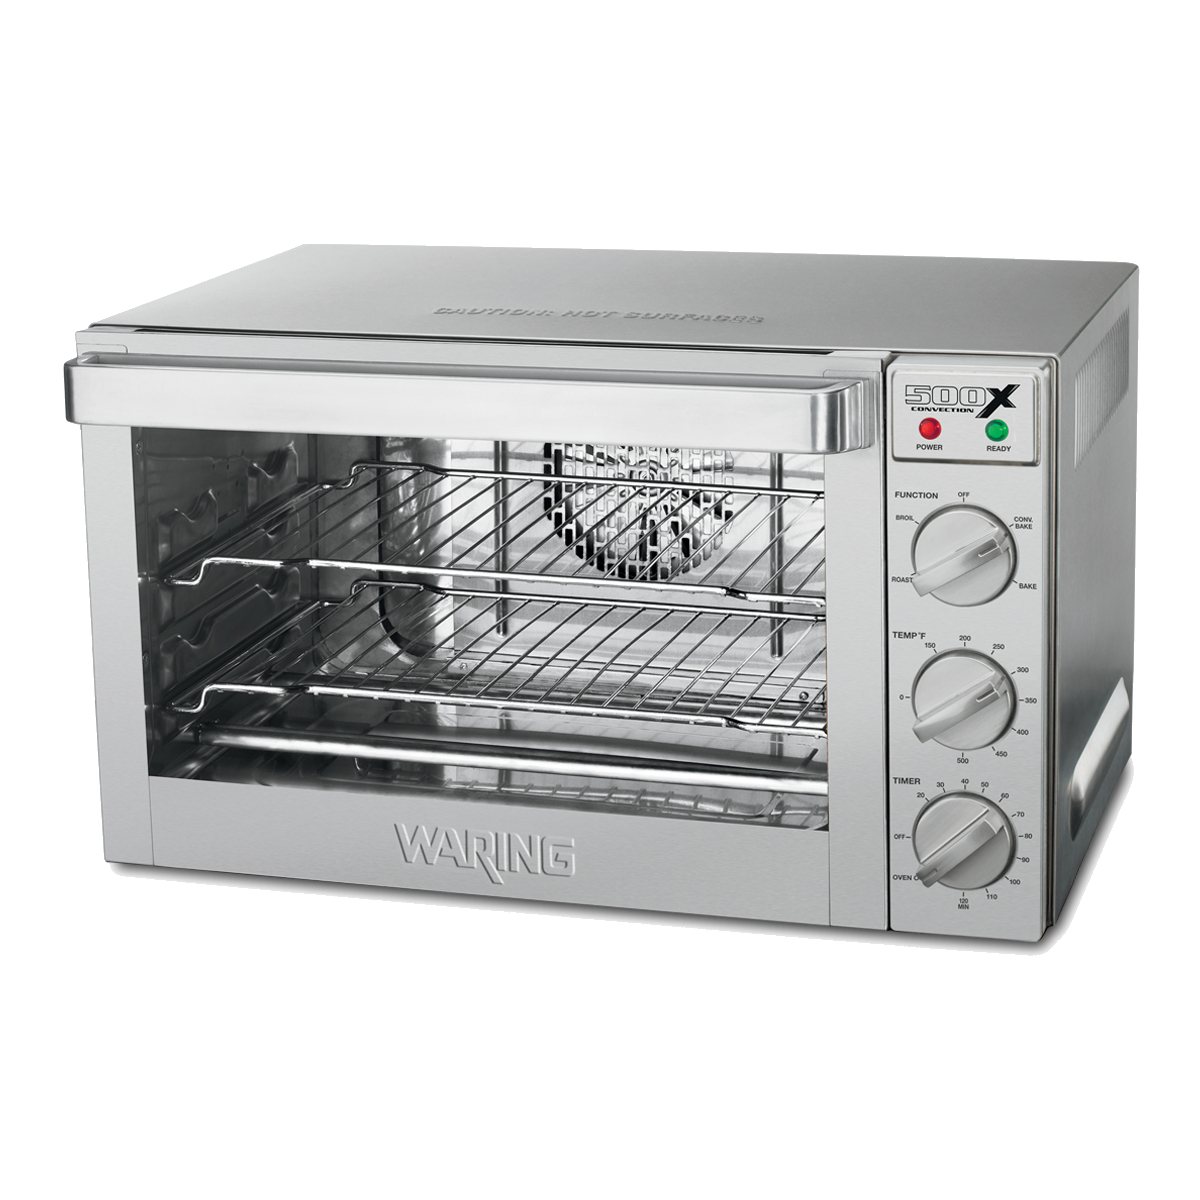 Half-Size Convection Oven